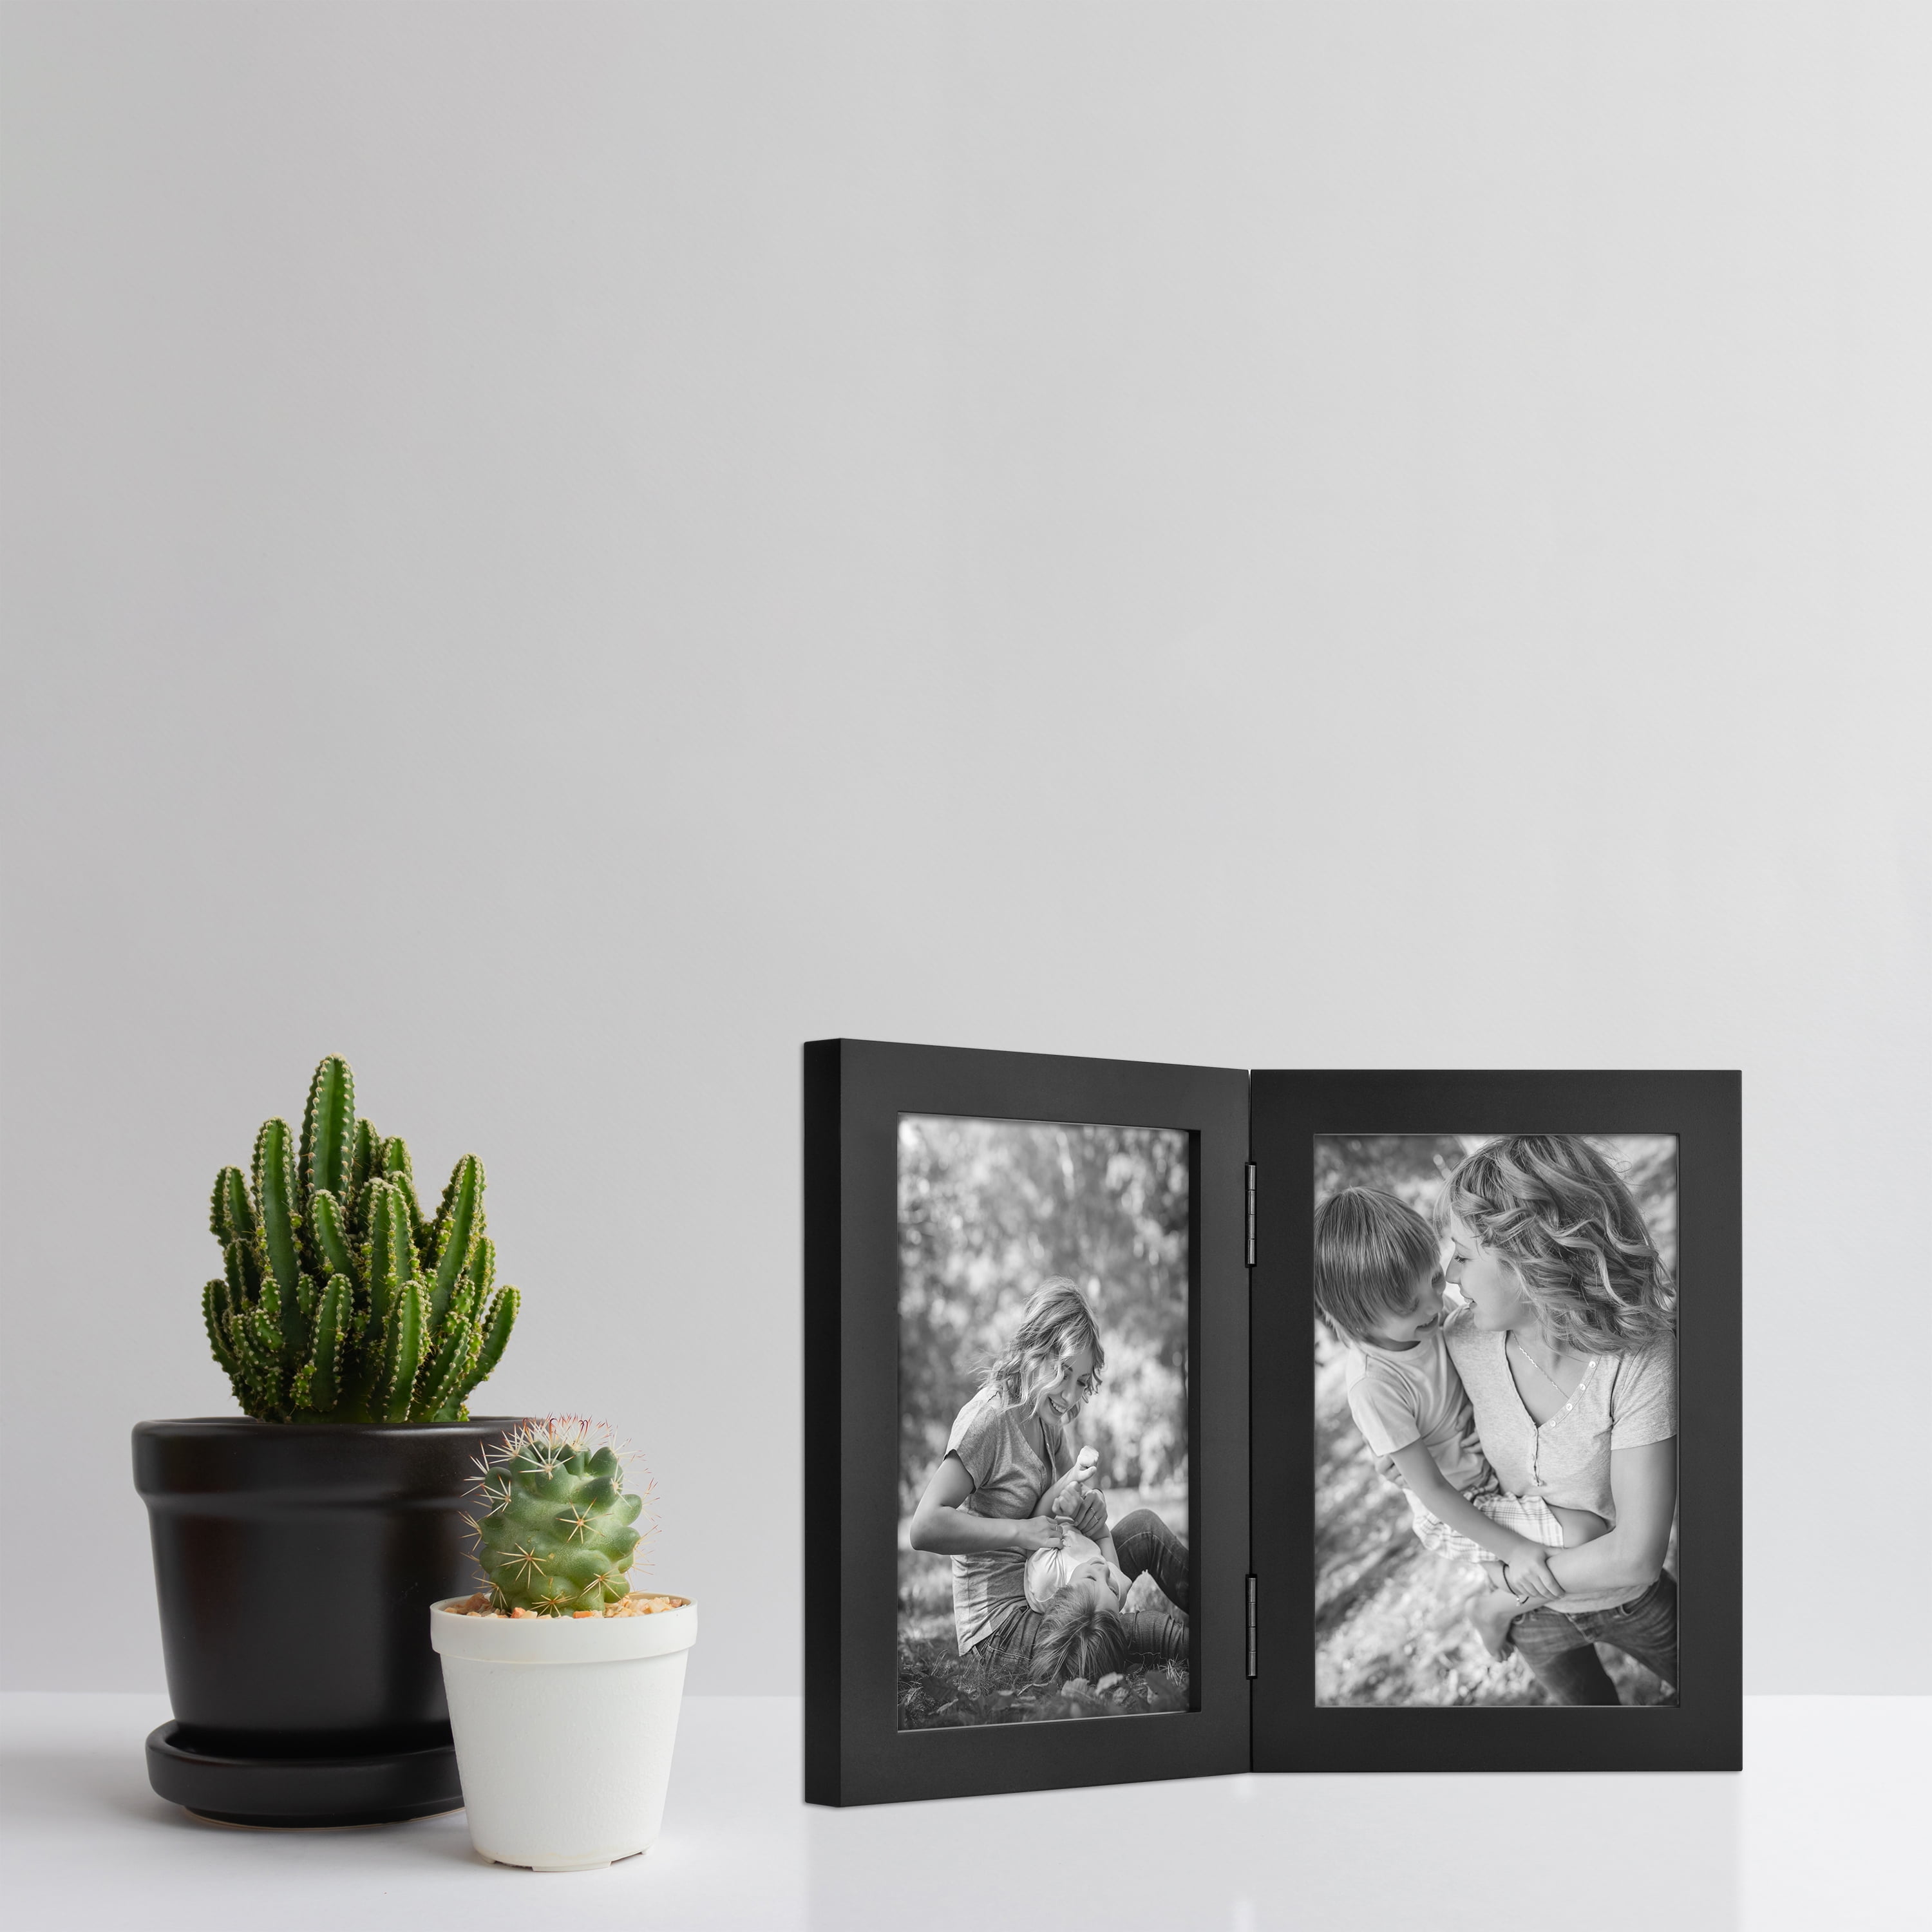  POILKMNI 4 Folding 4x6 Inch Hinged Picture Frame